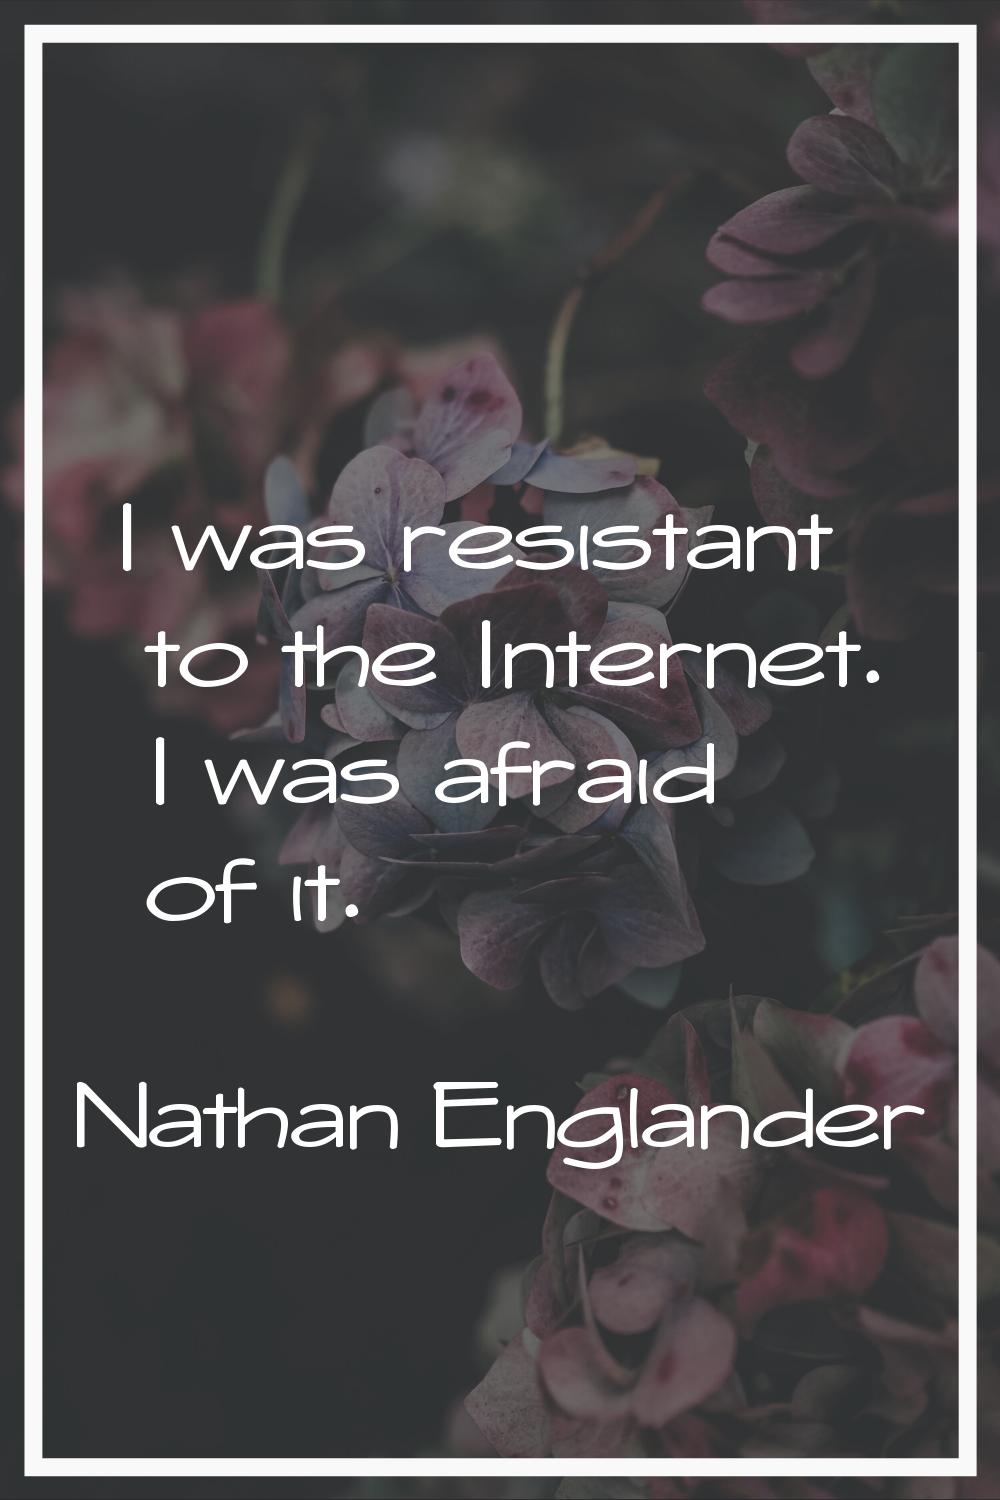 I was resistant to the Internet. I was afraid of it.